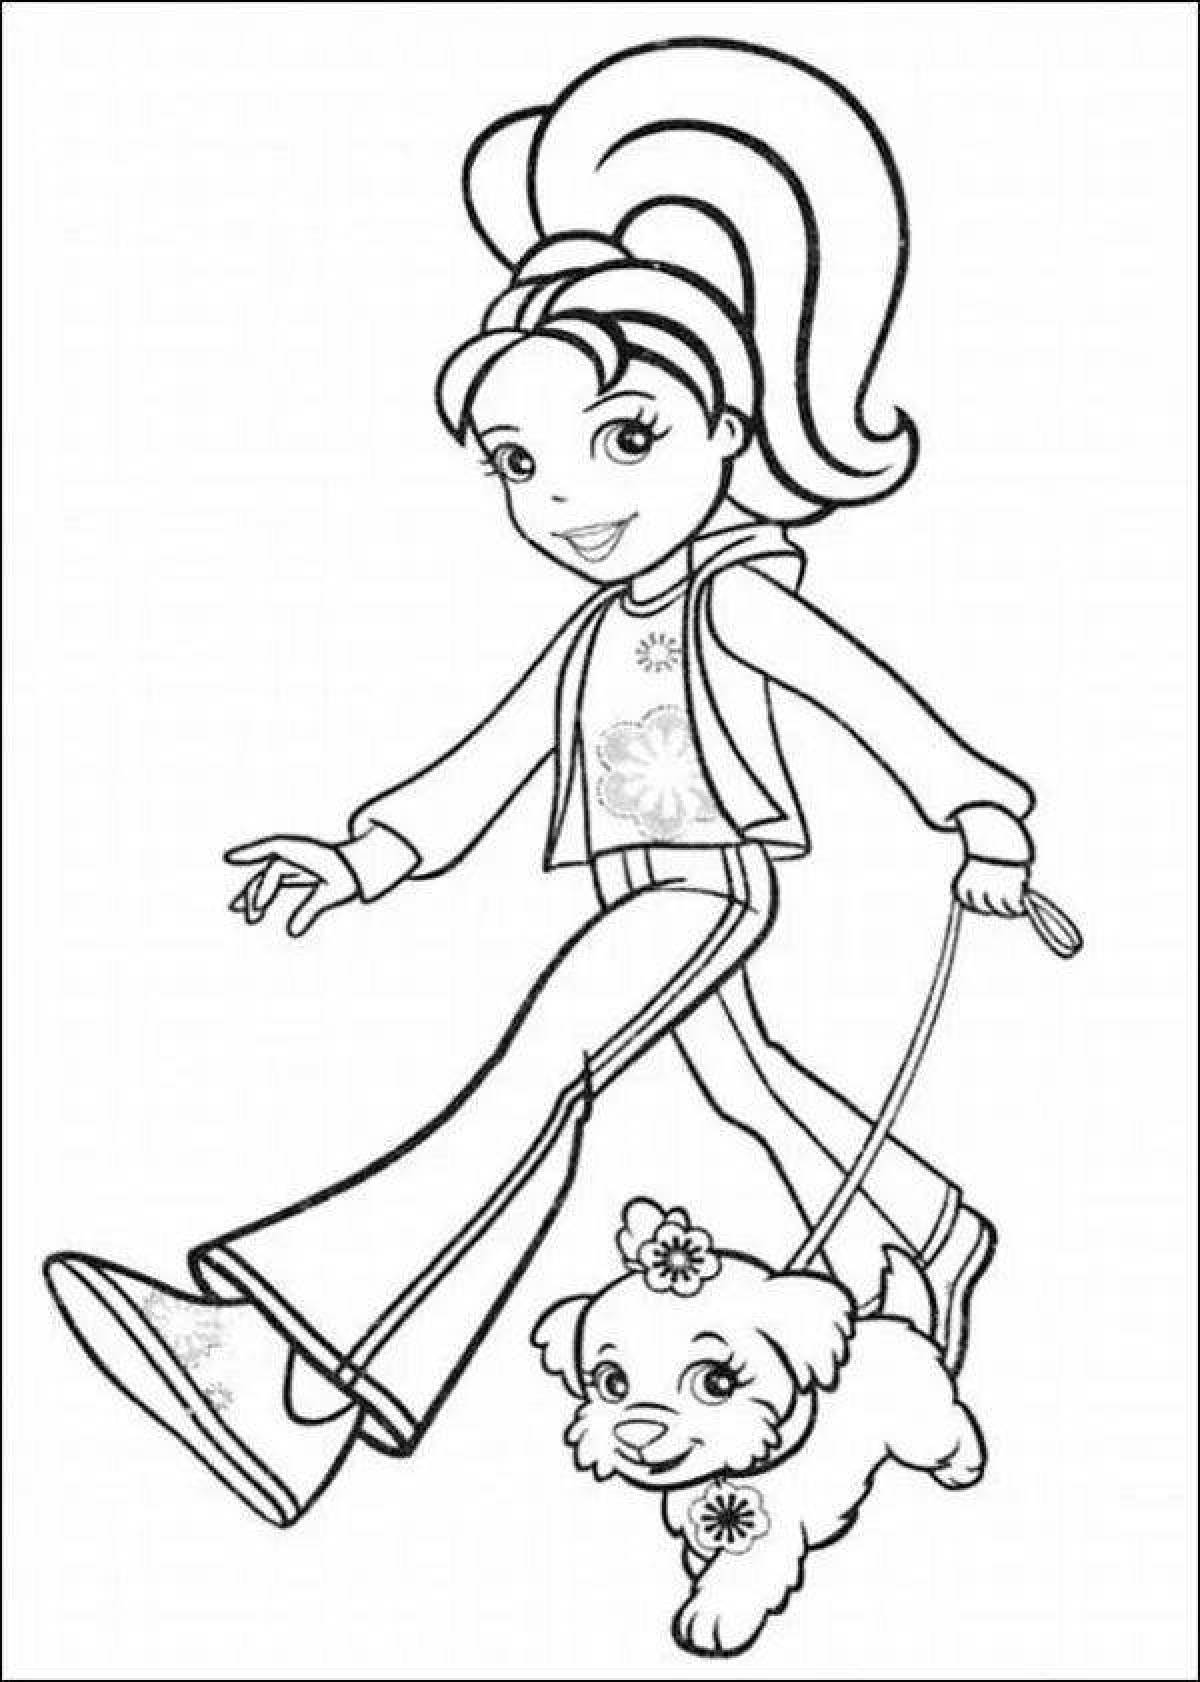 Luminous coloring book girl with a dog